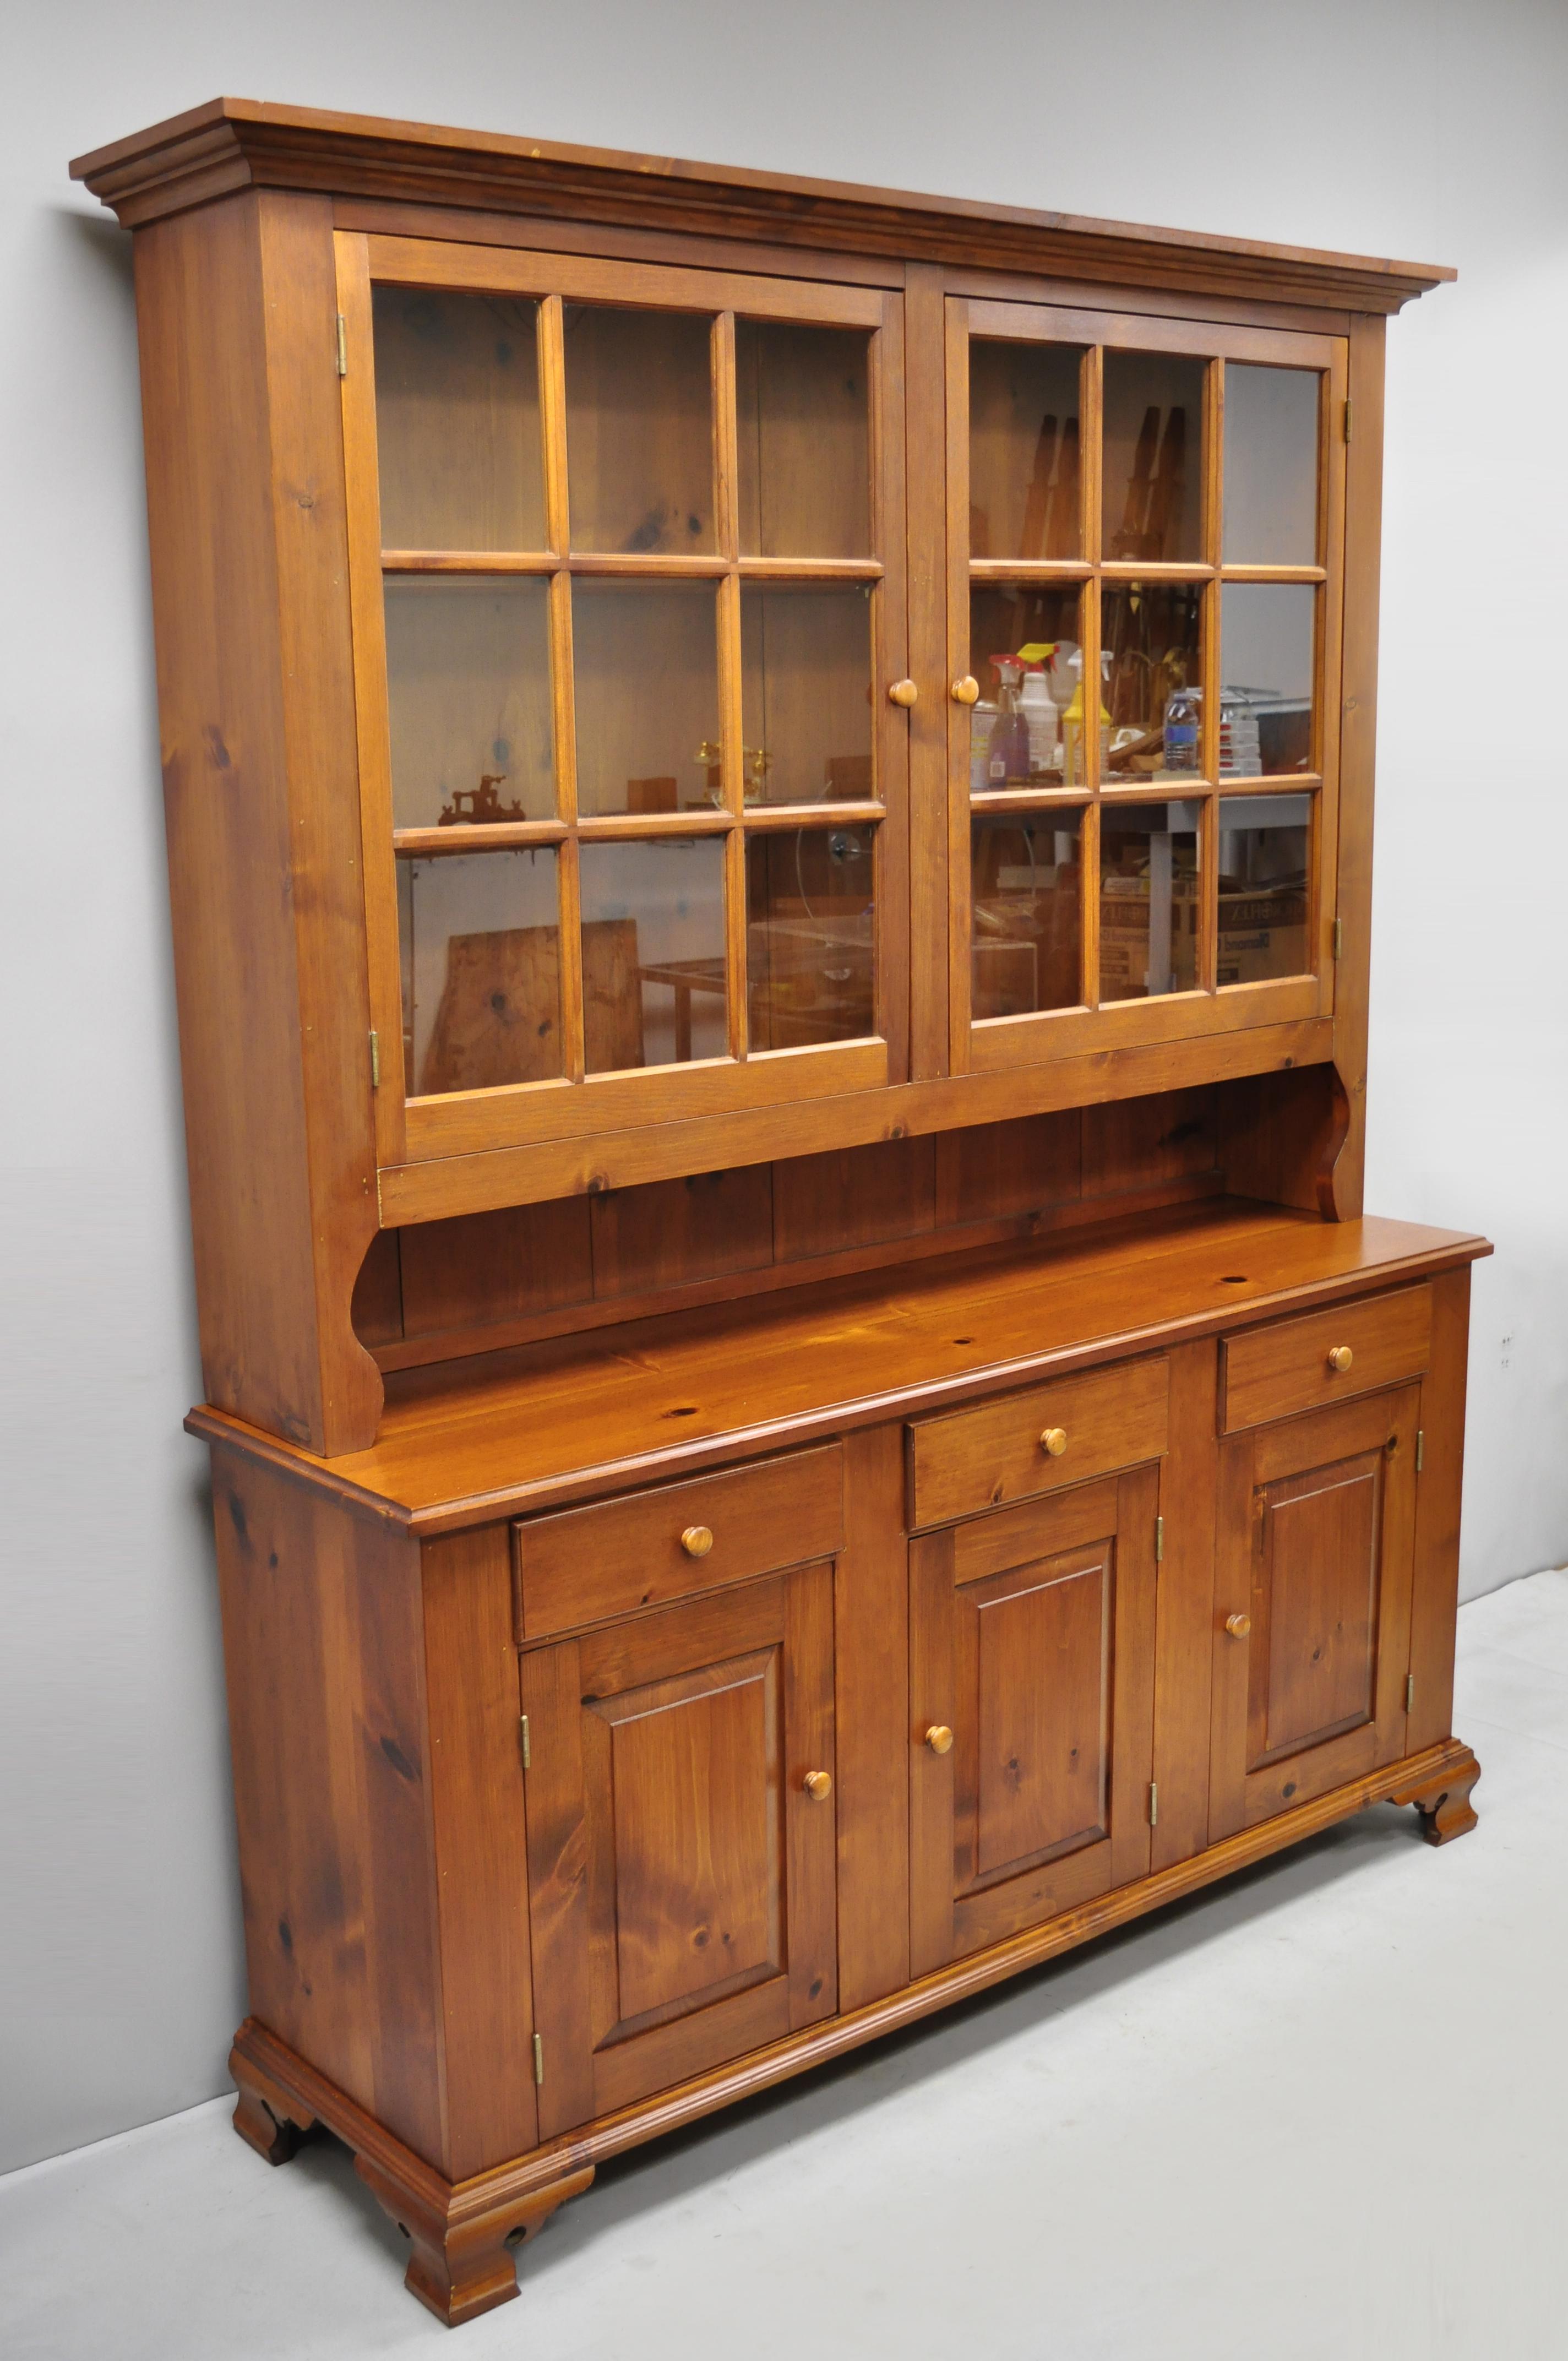 Vintage Tom Seely pine wood step back hutch cupboard china cabinet. Listing features solid wood construction, beautiful wood grain, 2 part construction, original stamp, plate groves, 3 dovetailed drawers, quality American craftsmanship, circa late